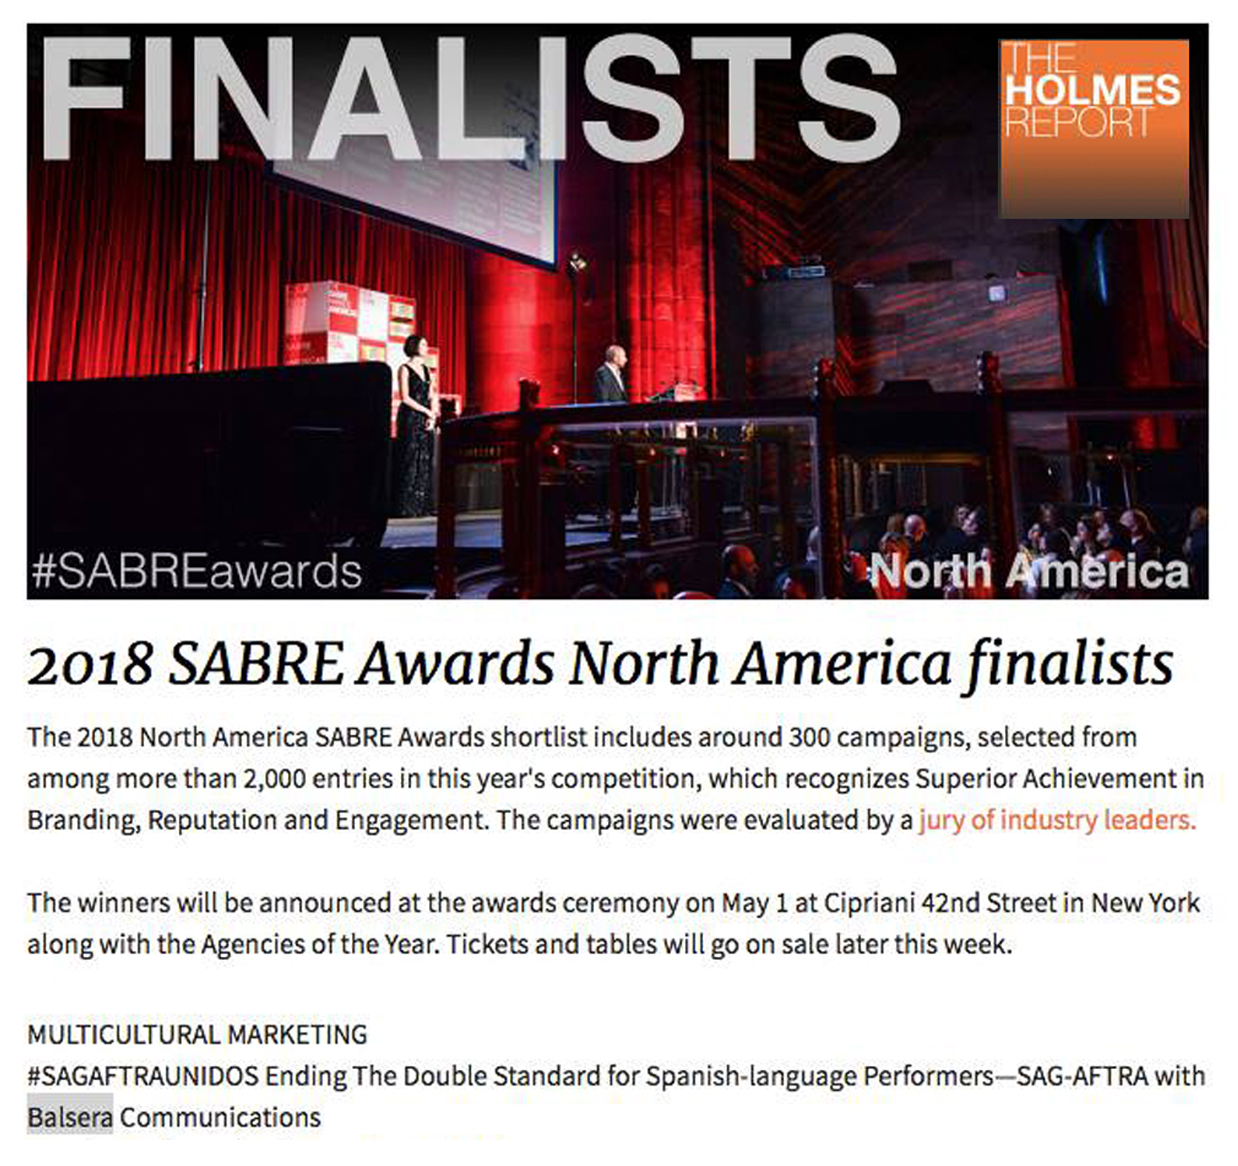 Balsera Communications recognized for its outstanding work for SAG-AFTRA by The Holmes Report Sabre Awards